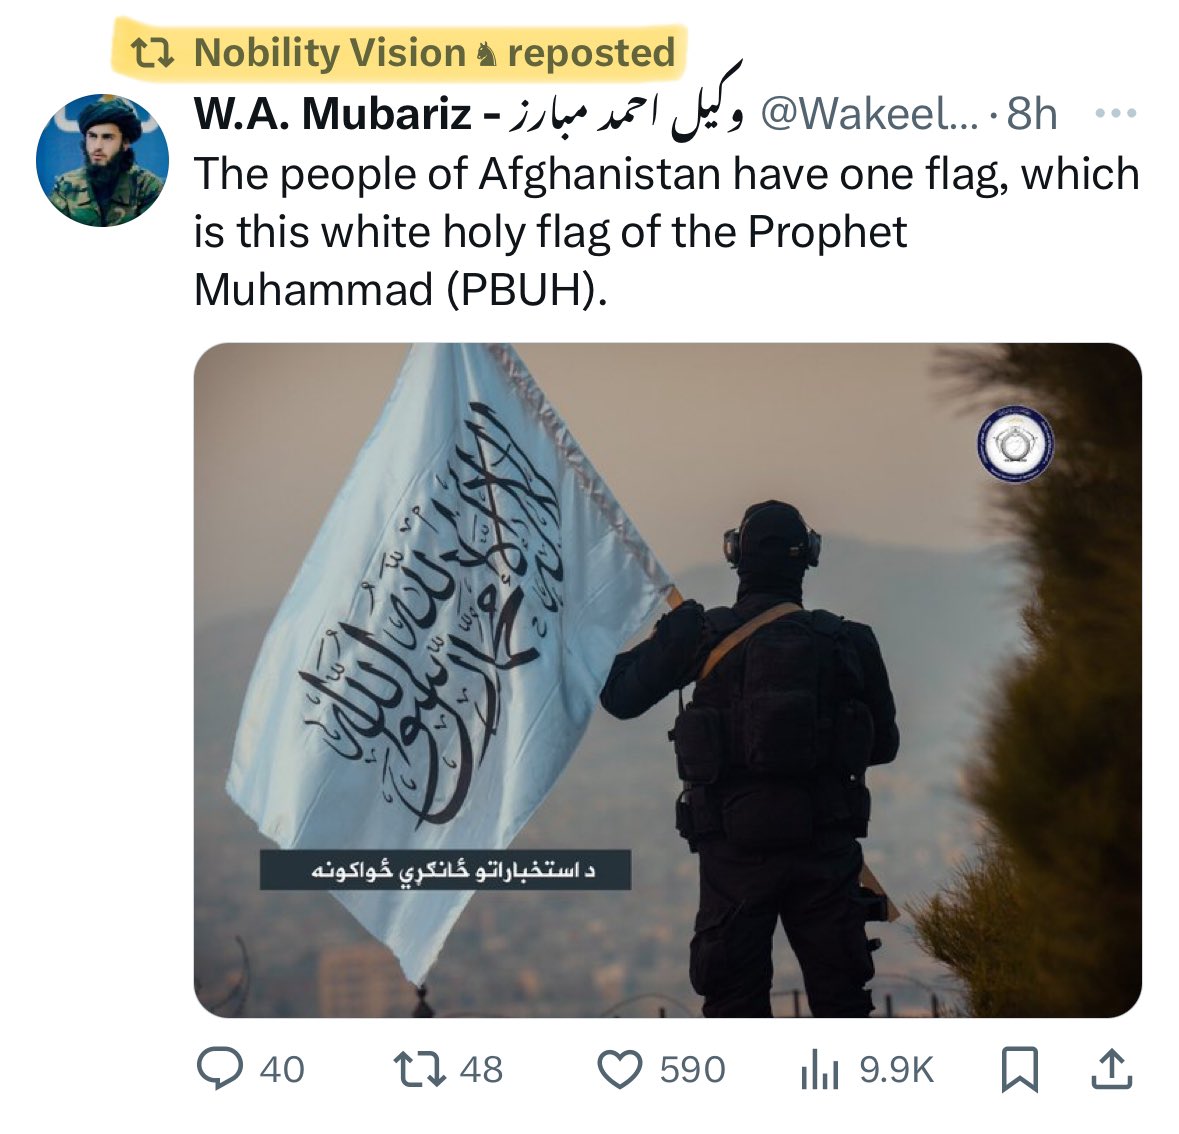 This is an example of a munafiq Pinned tweet about the “Islamic Emirate” and how it follows the way of the Prophet ﷺ and at the same time using such terms for a Muslim woman